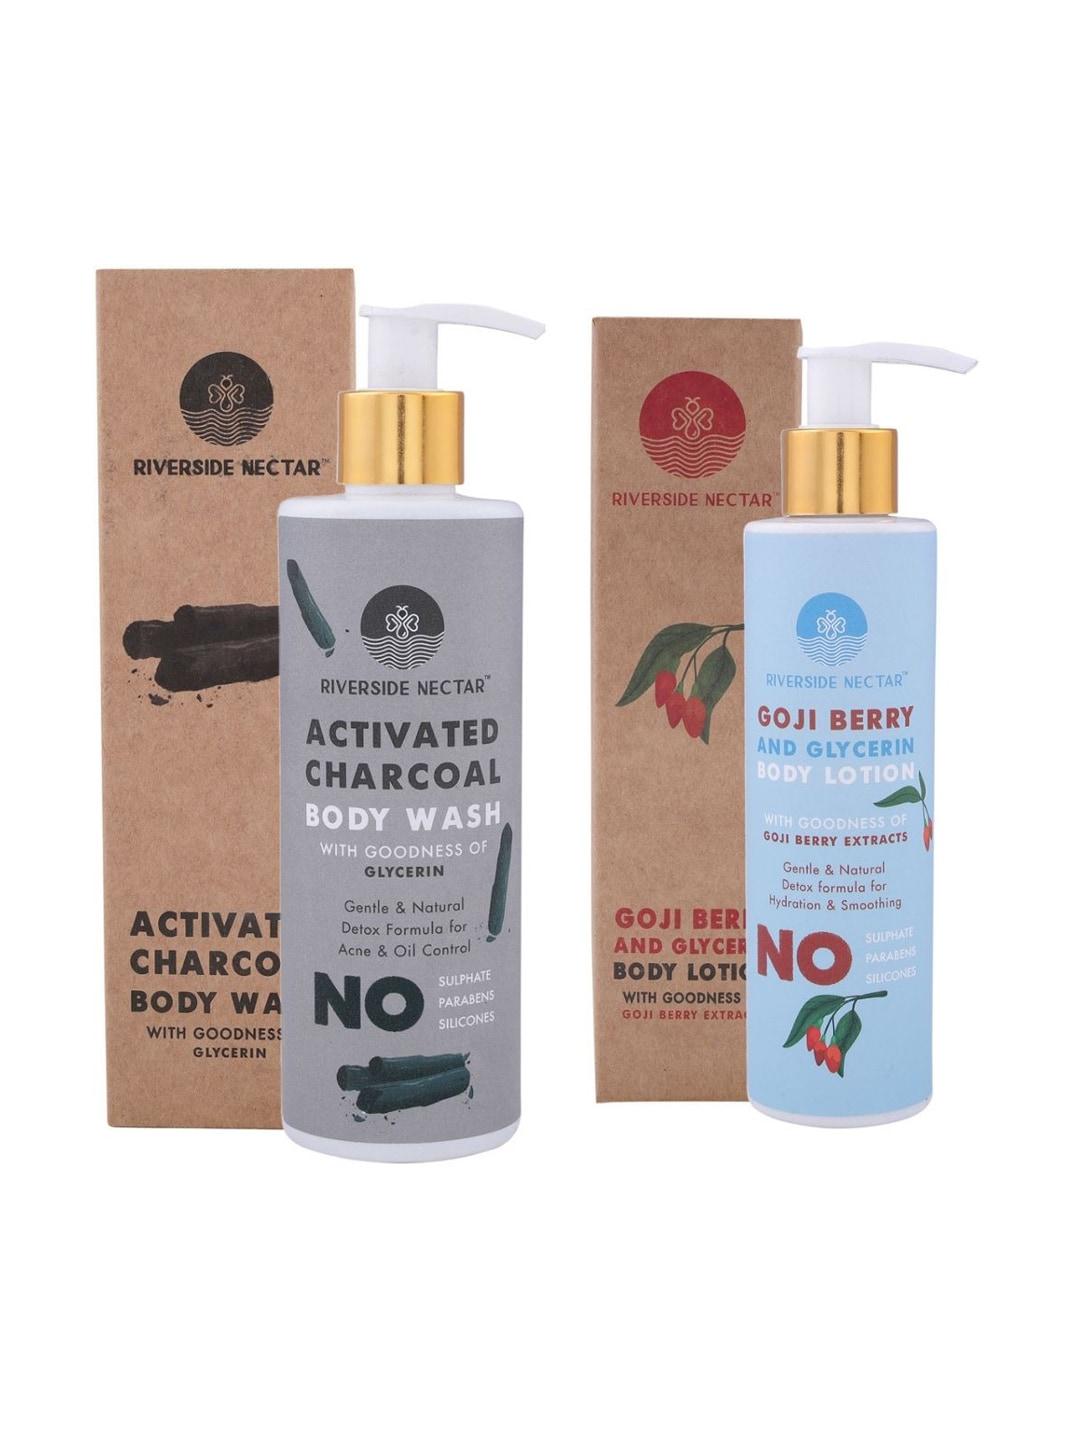 riverside nectar set of activated charcoal body wash & goji berry body lotion